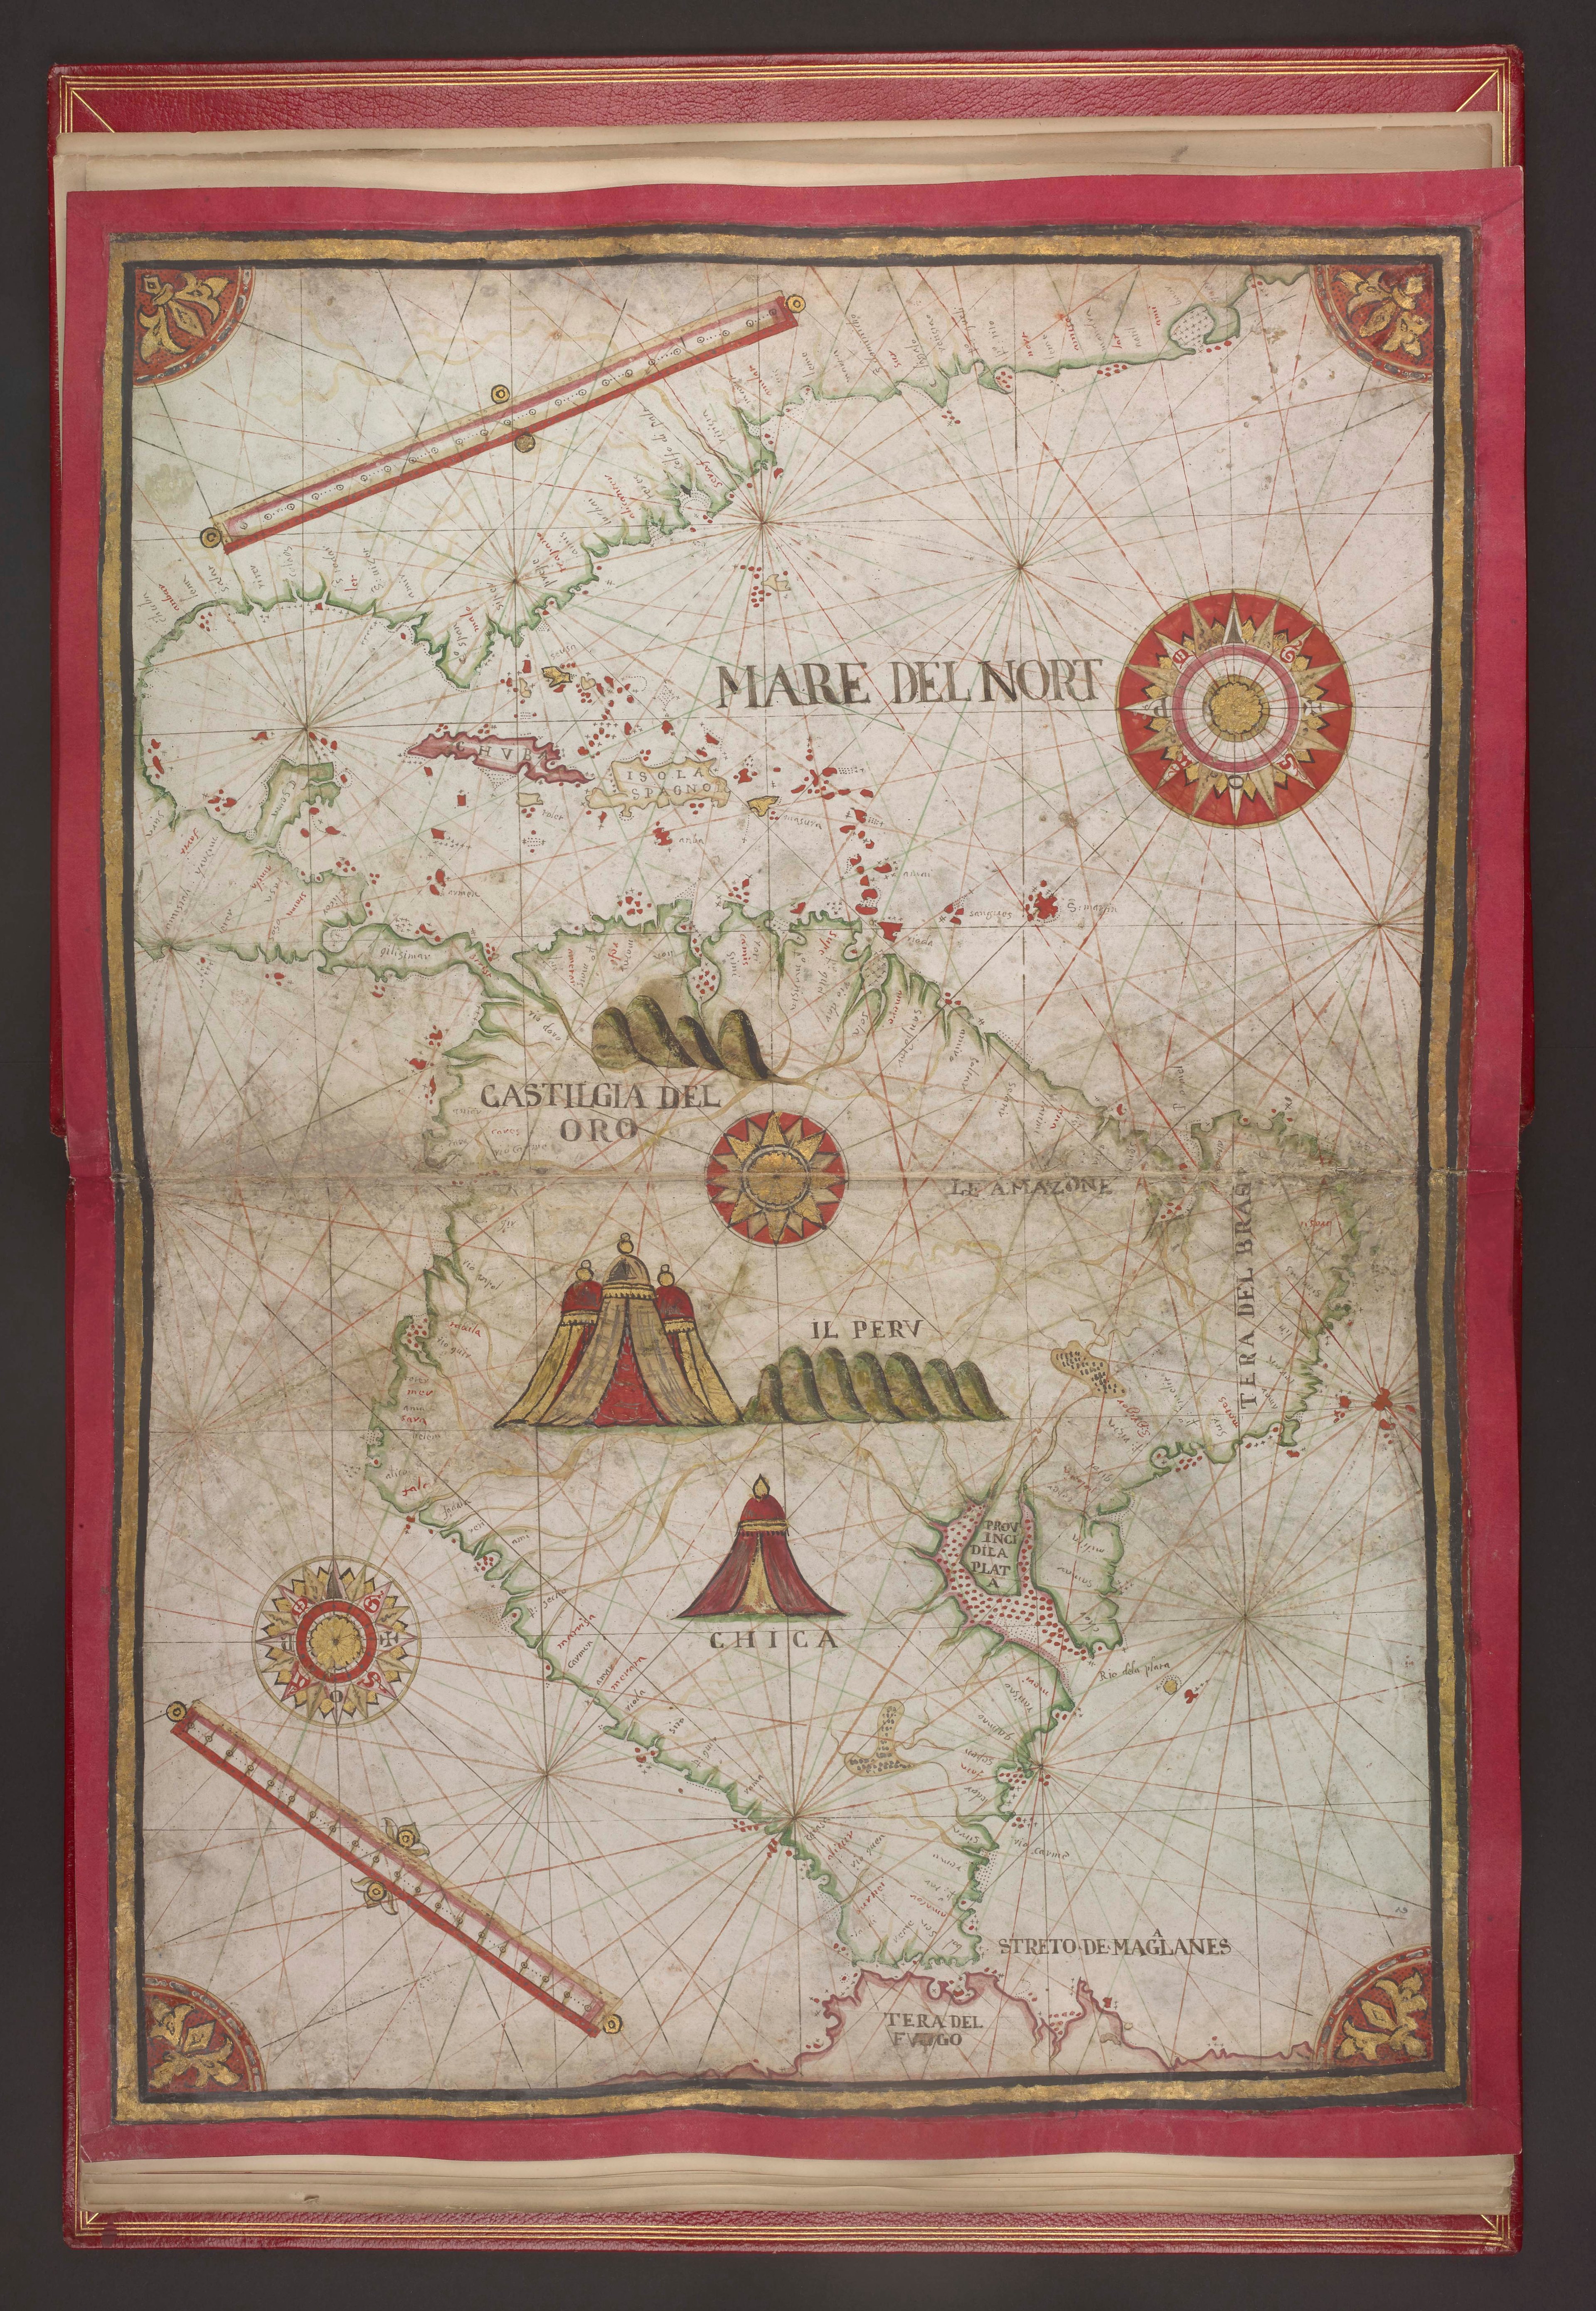 Alvise de Cadamosto map of Cape Verde with intricate illustrations in reds, golds and greens